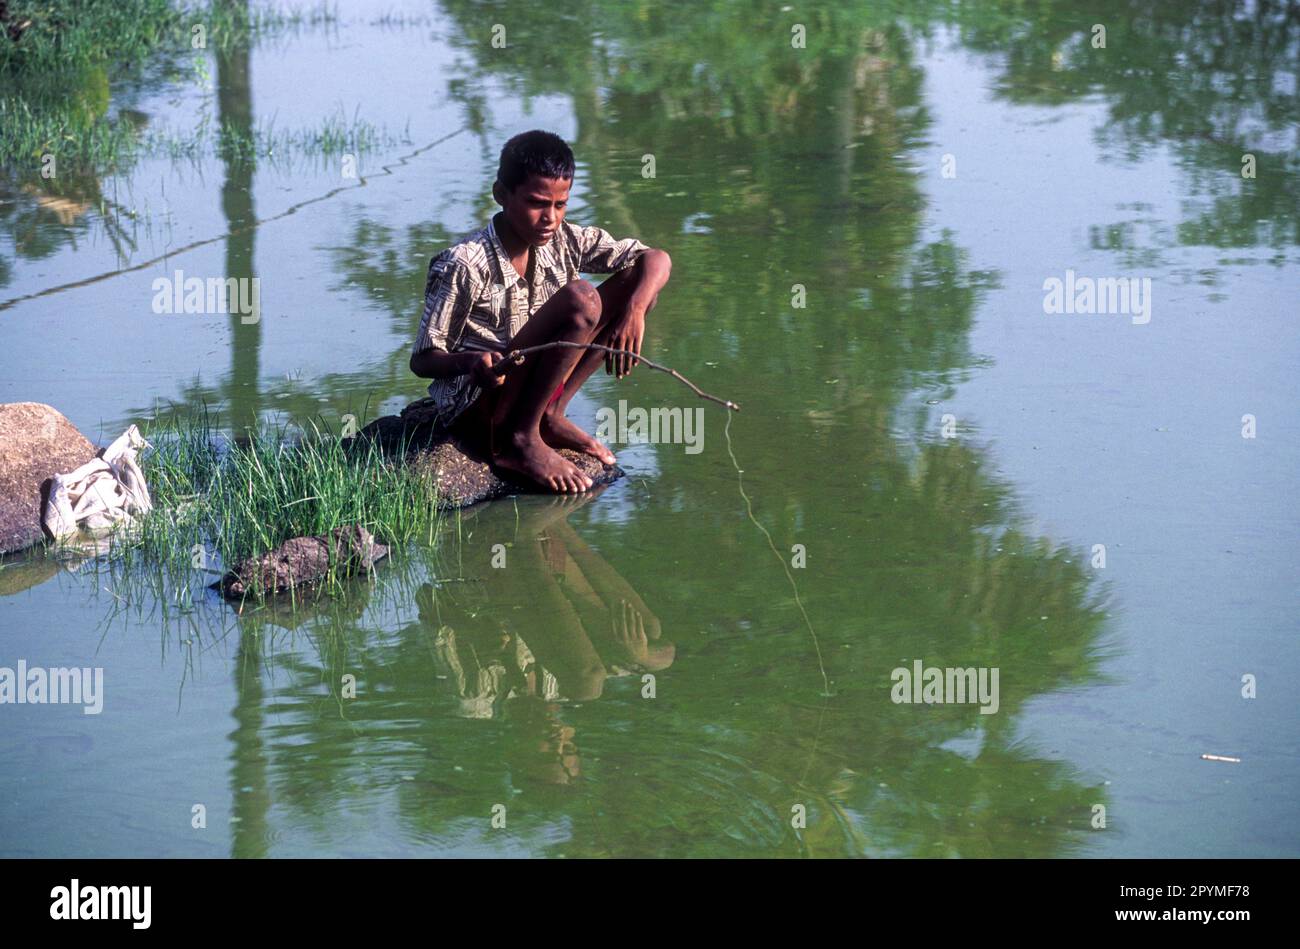 A boy angling, Tamil Nadu, South India, India, Asia Stock Photo